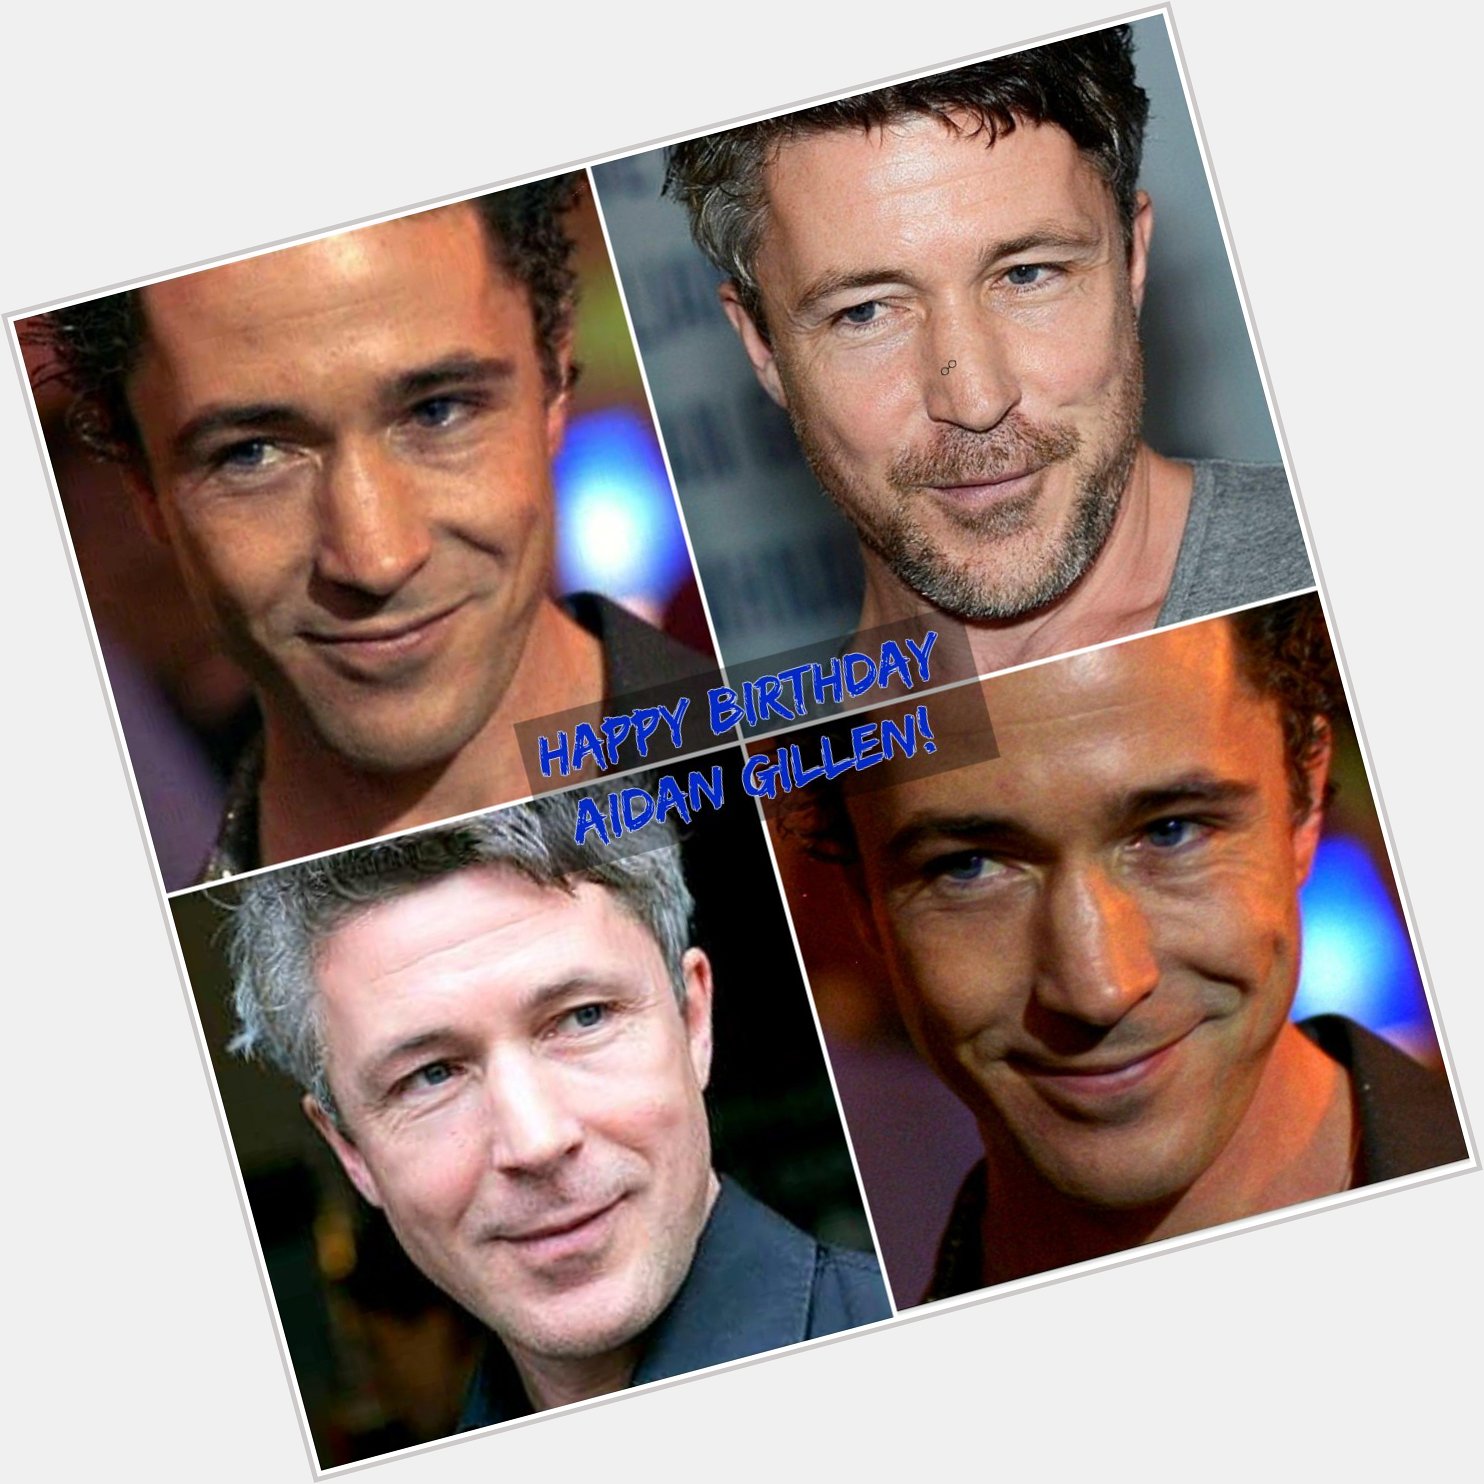 Happy 47th Birthday to Aidan Gillen! Hope he has a great day!!   